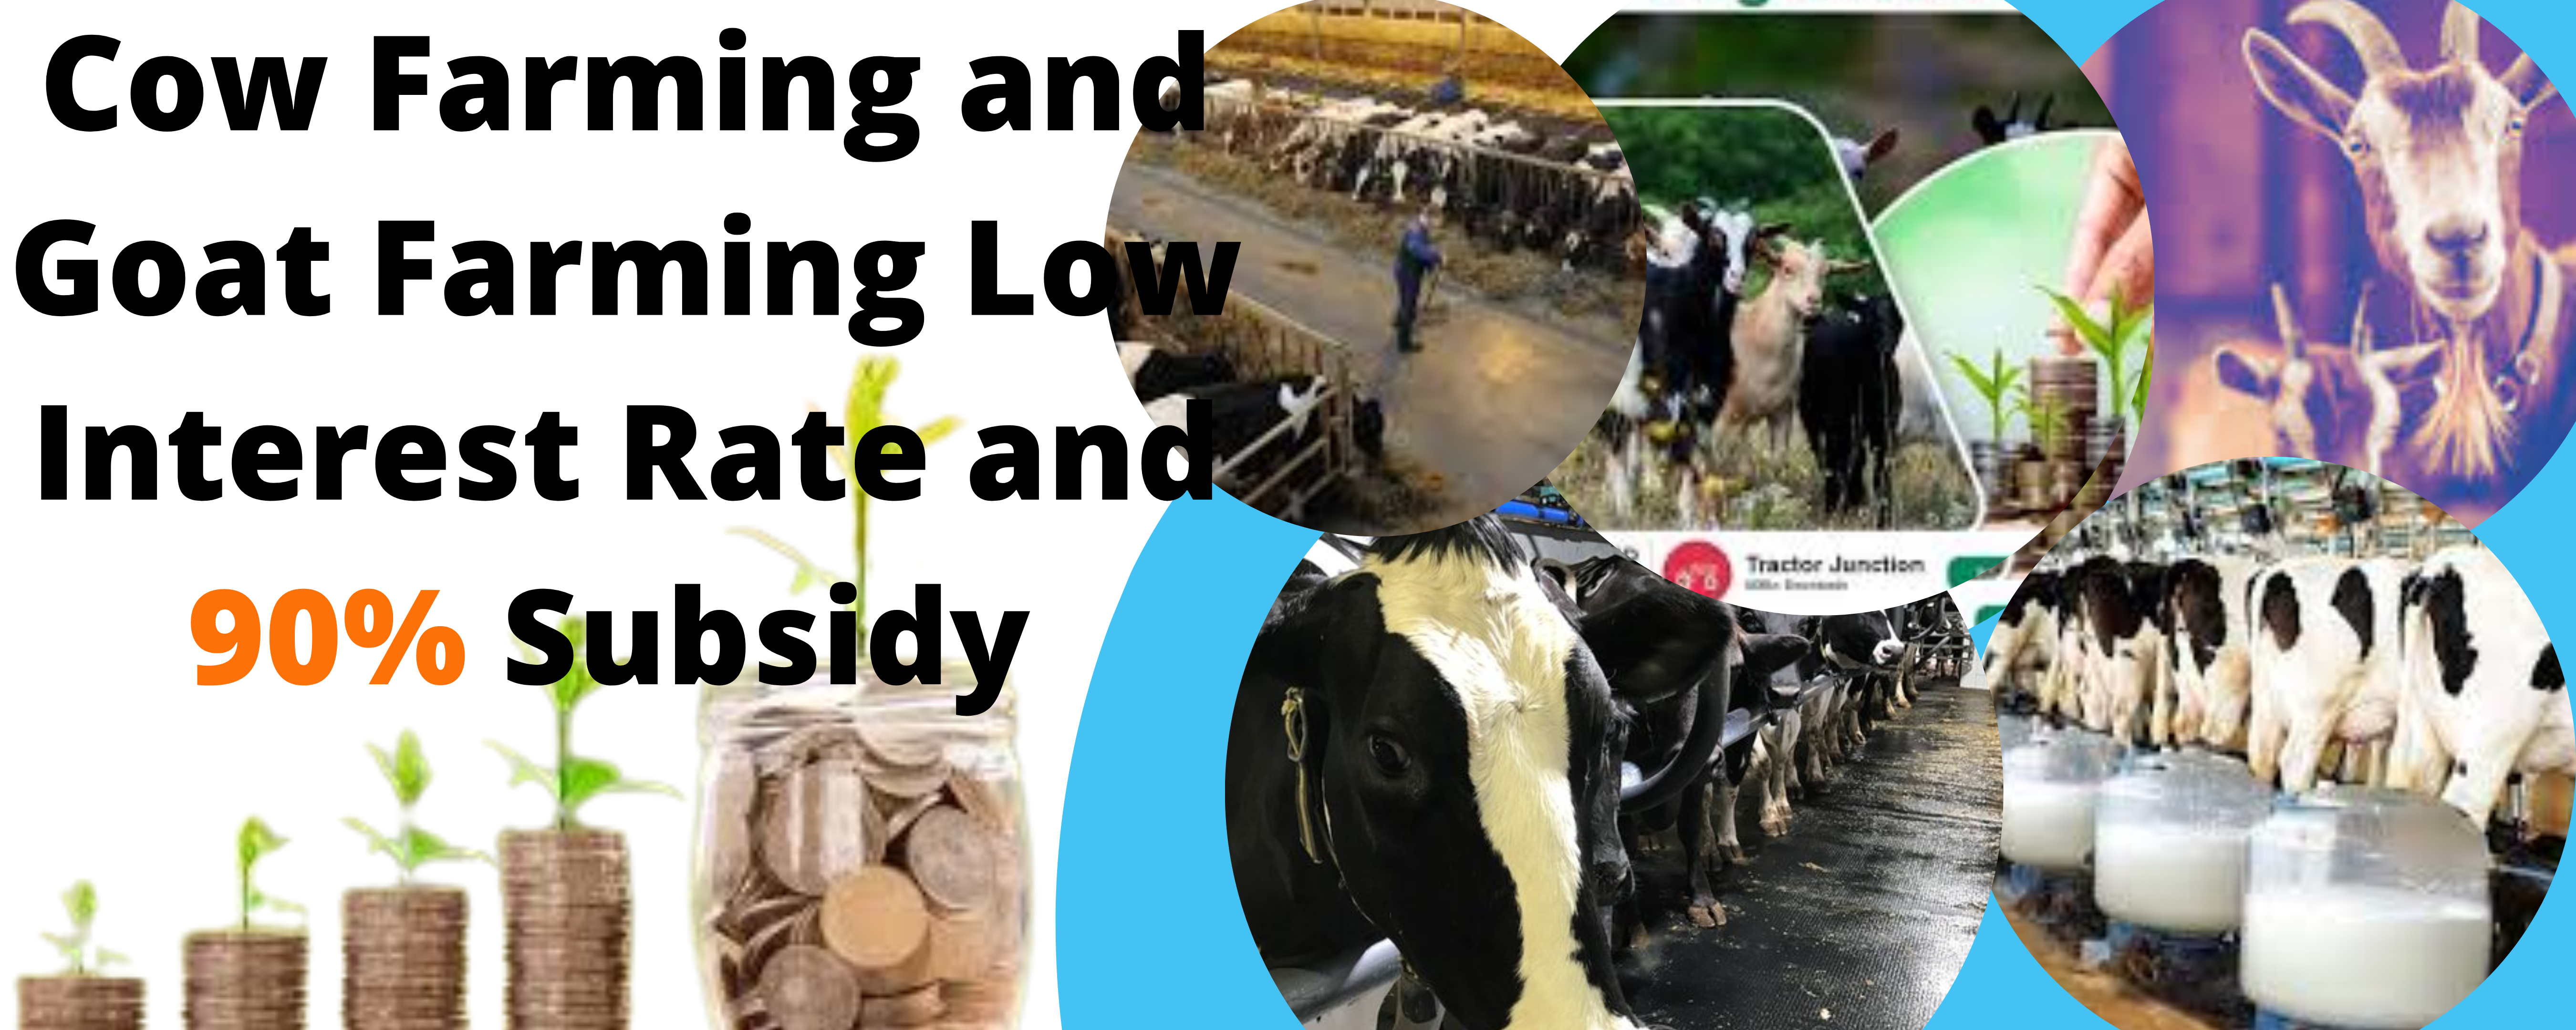 Cow-Farming-and-Goat-Farming-Low-Interest-Rate-and-90-Subsidy-1-1